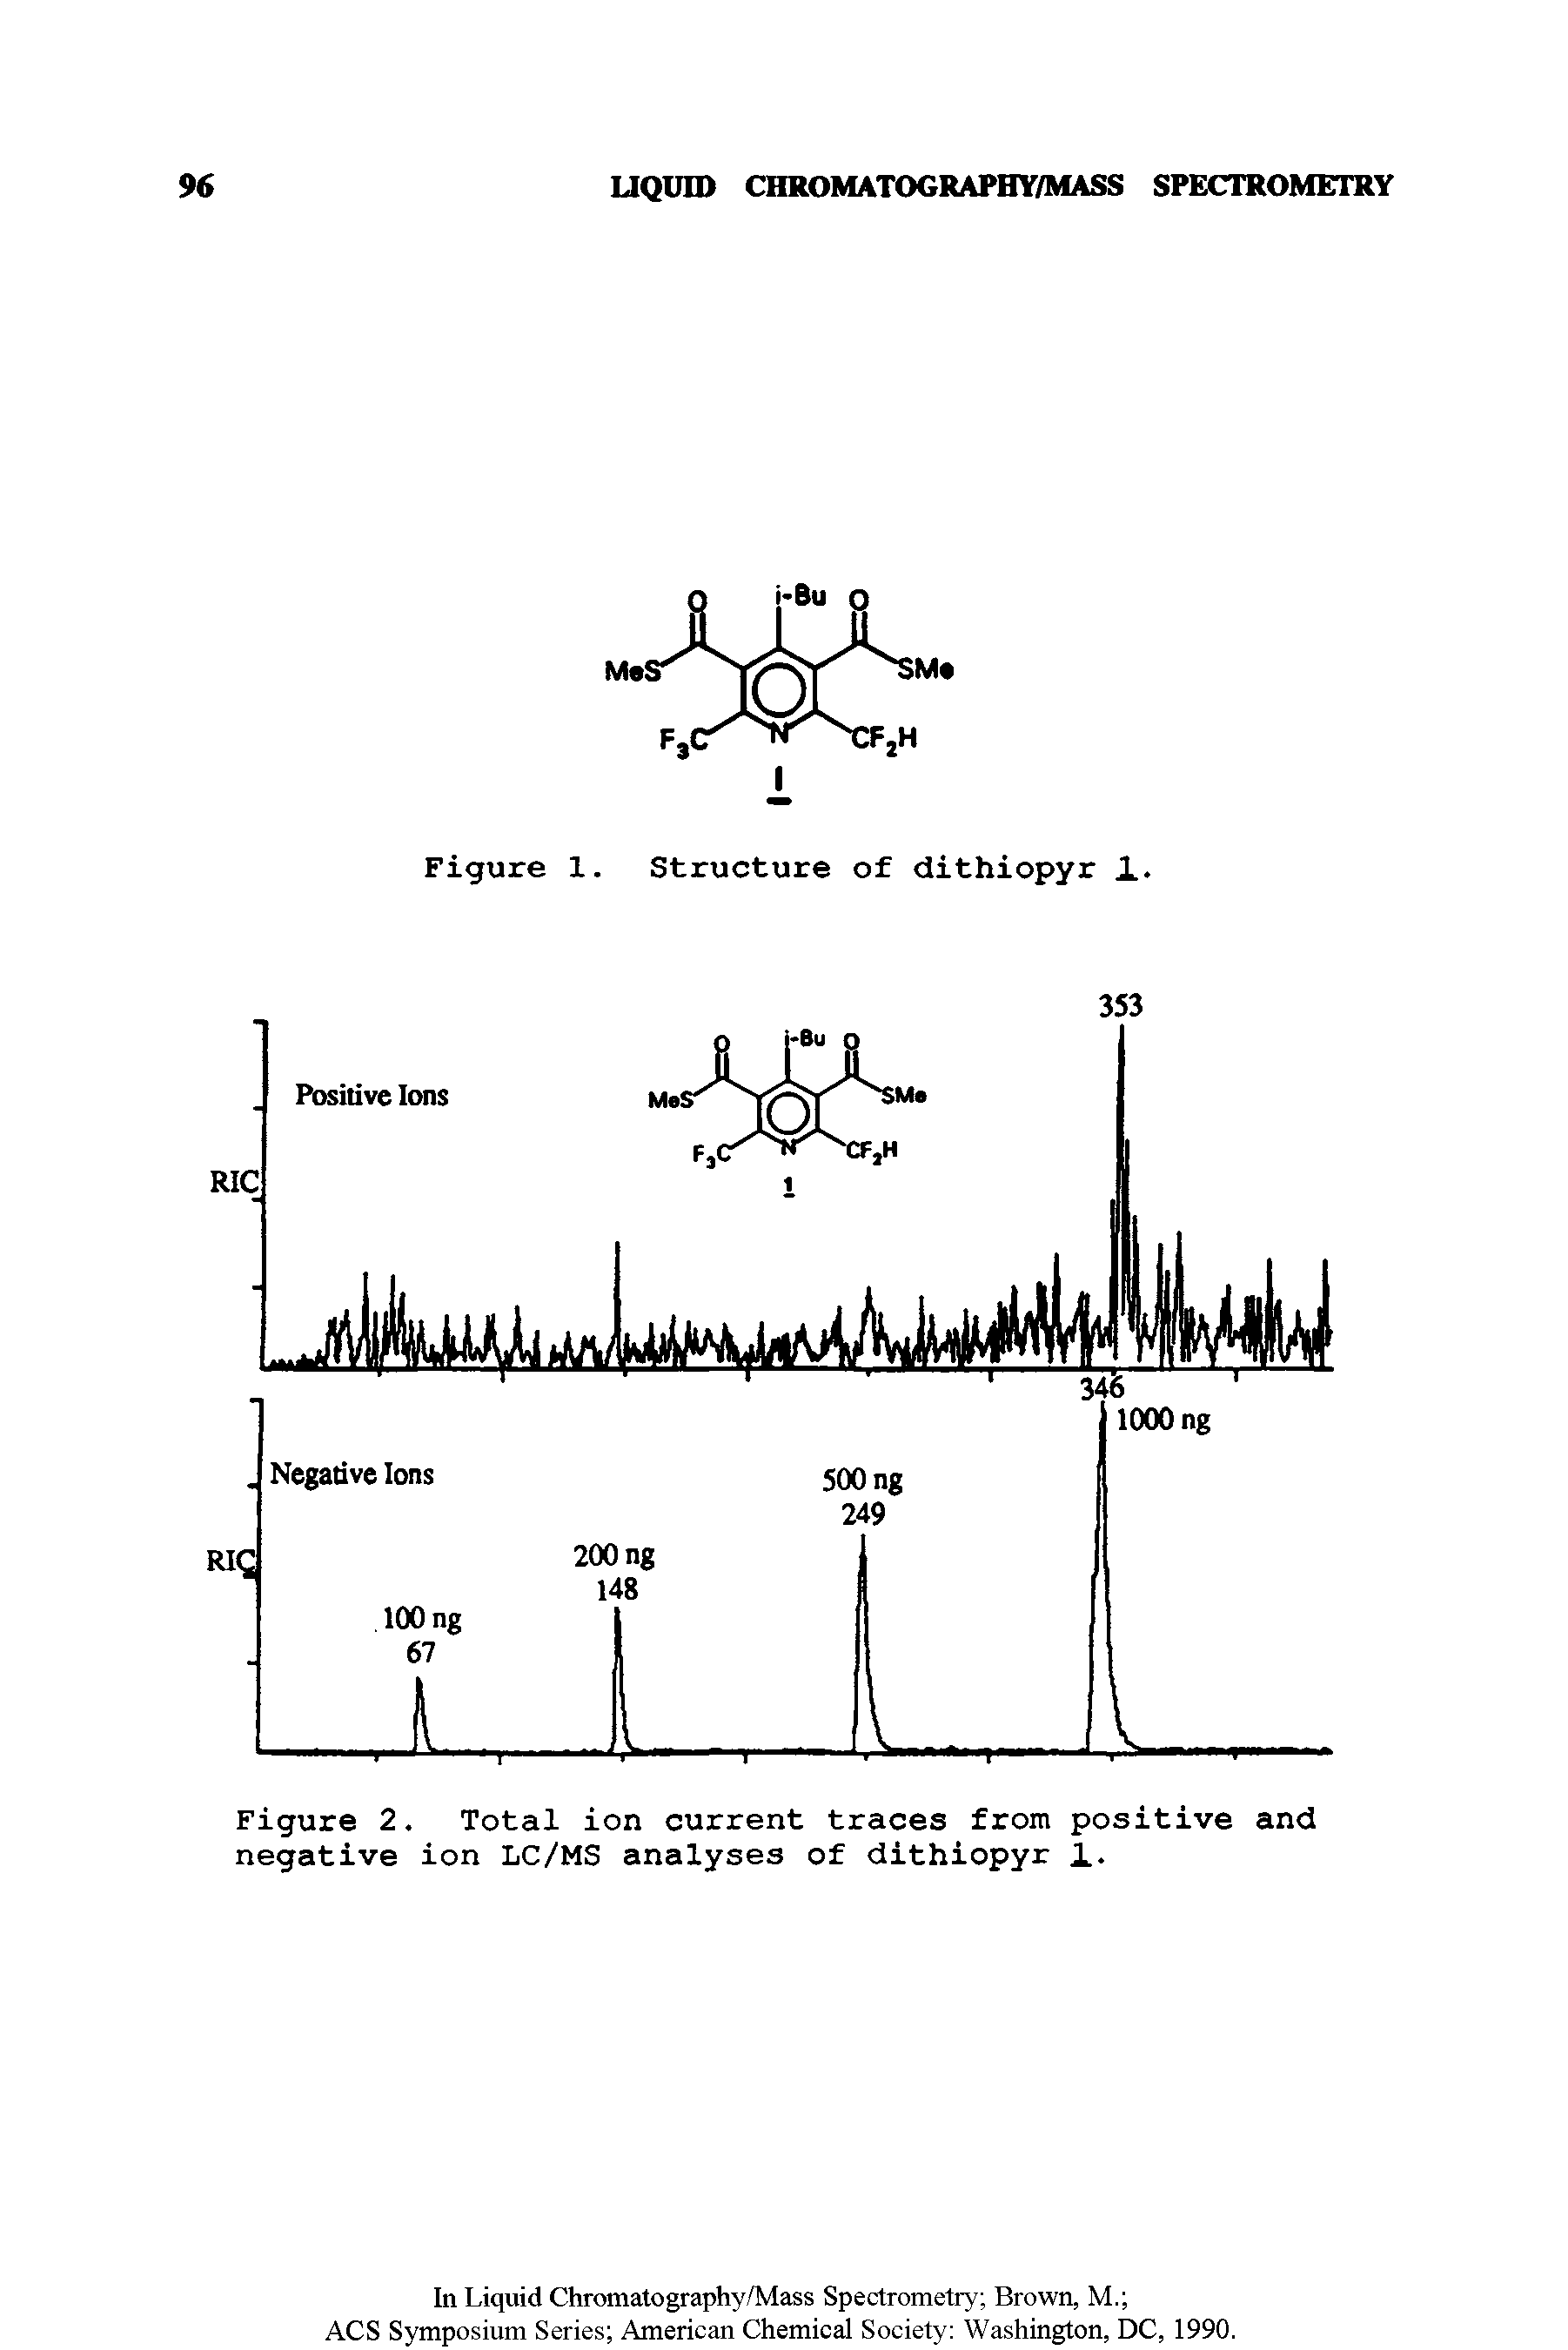 Figure 2. Total ion current traces from positive and negative ion LC/MS analyses of dithiopyr 1.